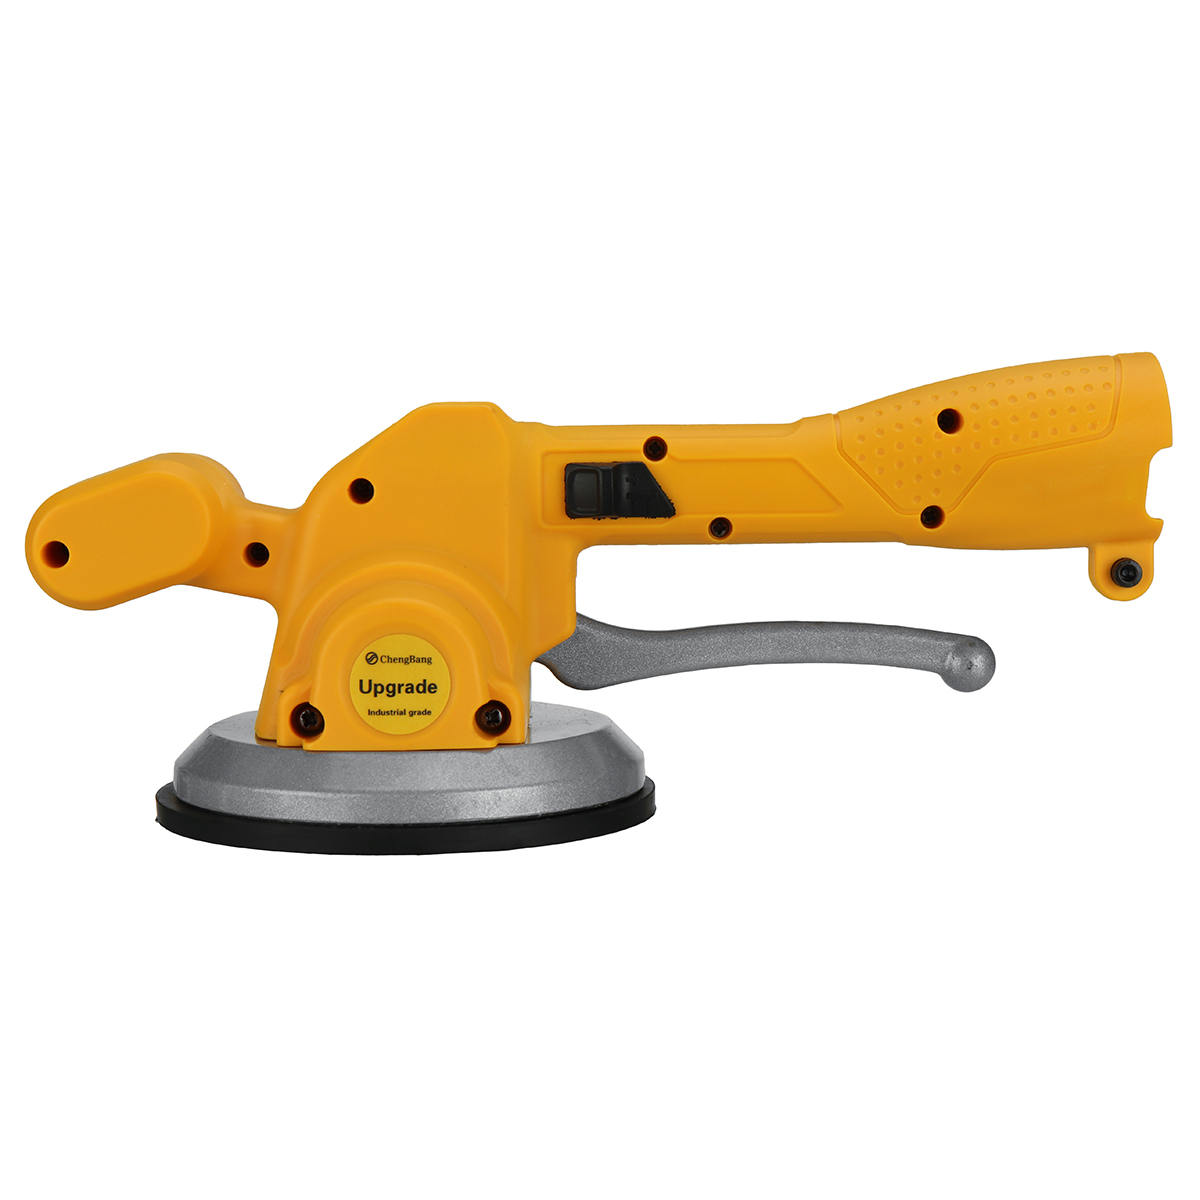 Find Electric Tile Tiling Machine Leveling Tools Vibrator 6 Gears Adjustable Professional Tiling Tools Machine Floor Laying for Sale on Gipsybee.com with cryptocurrencies